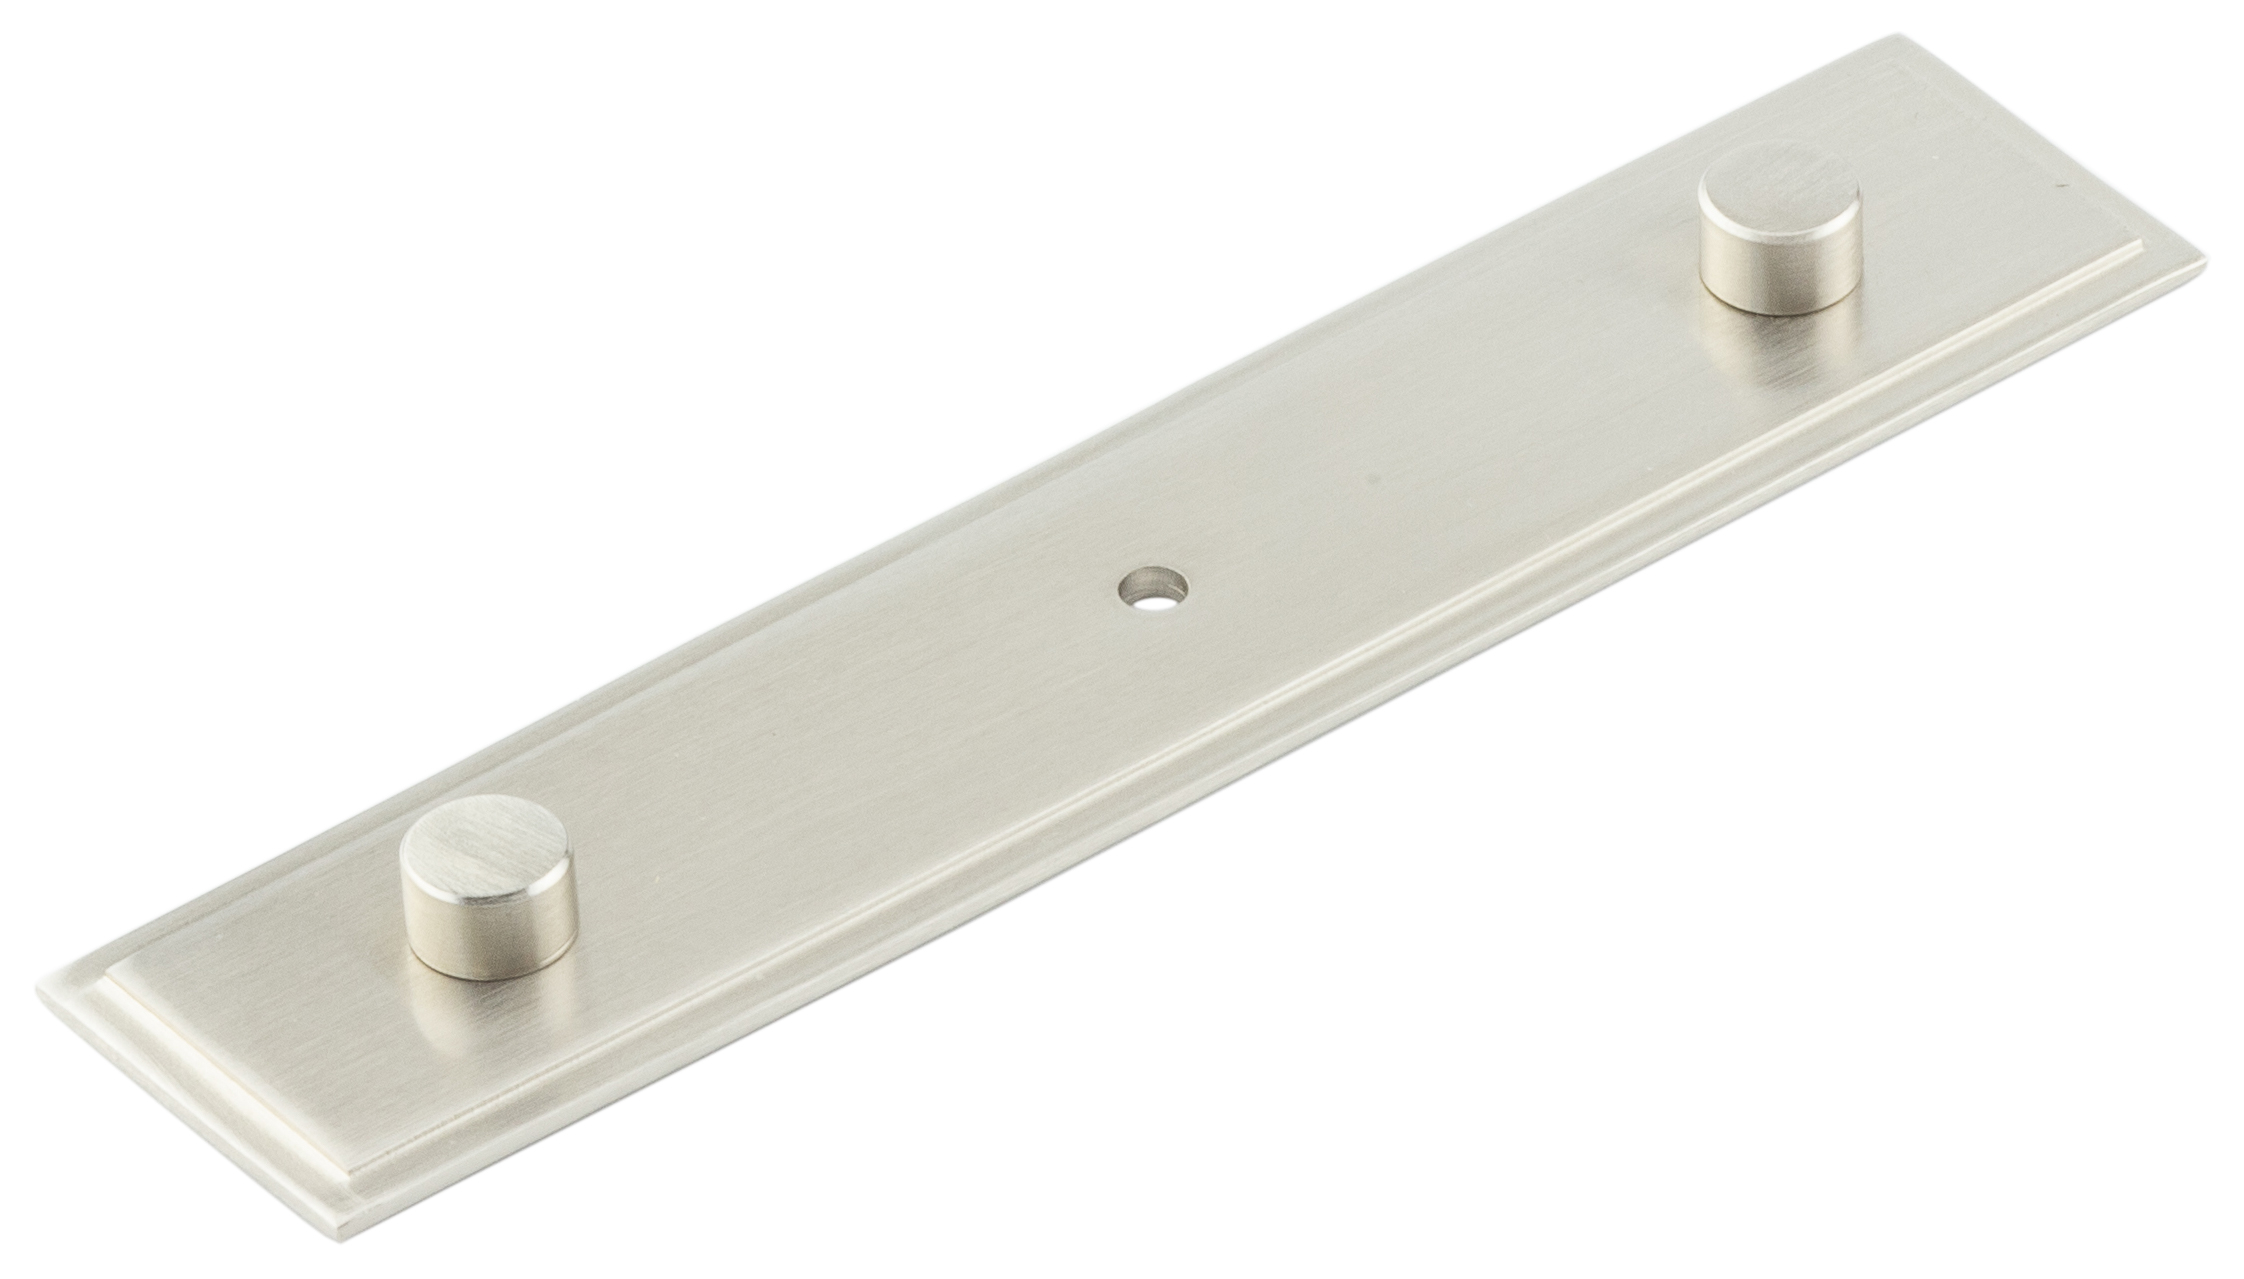 Rushton Sn 140x30mm Back Plate With Concealed Screw Caps